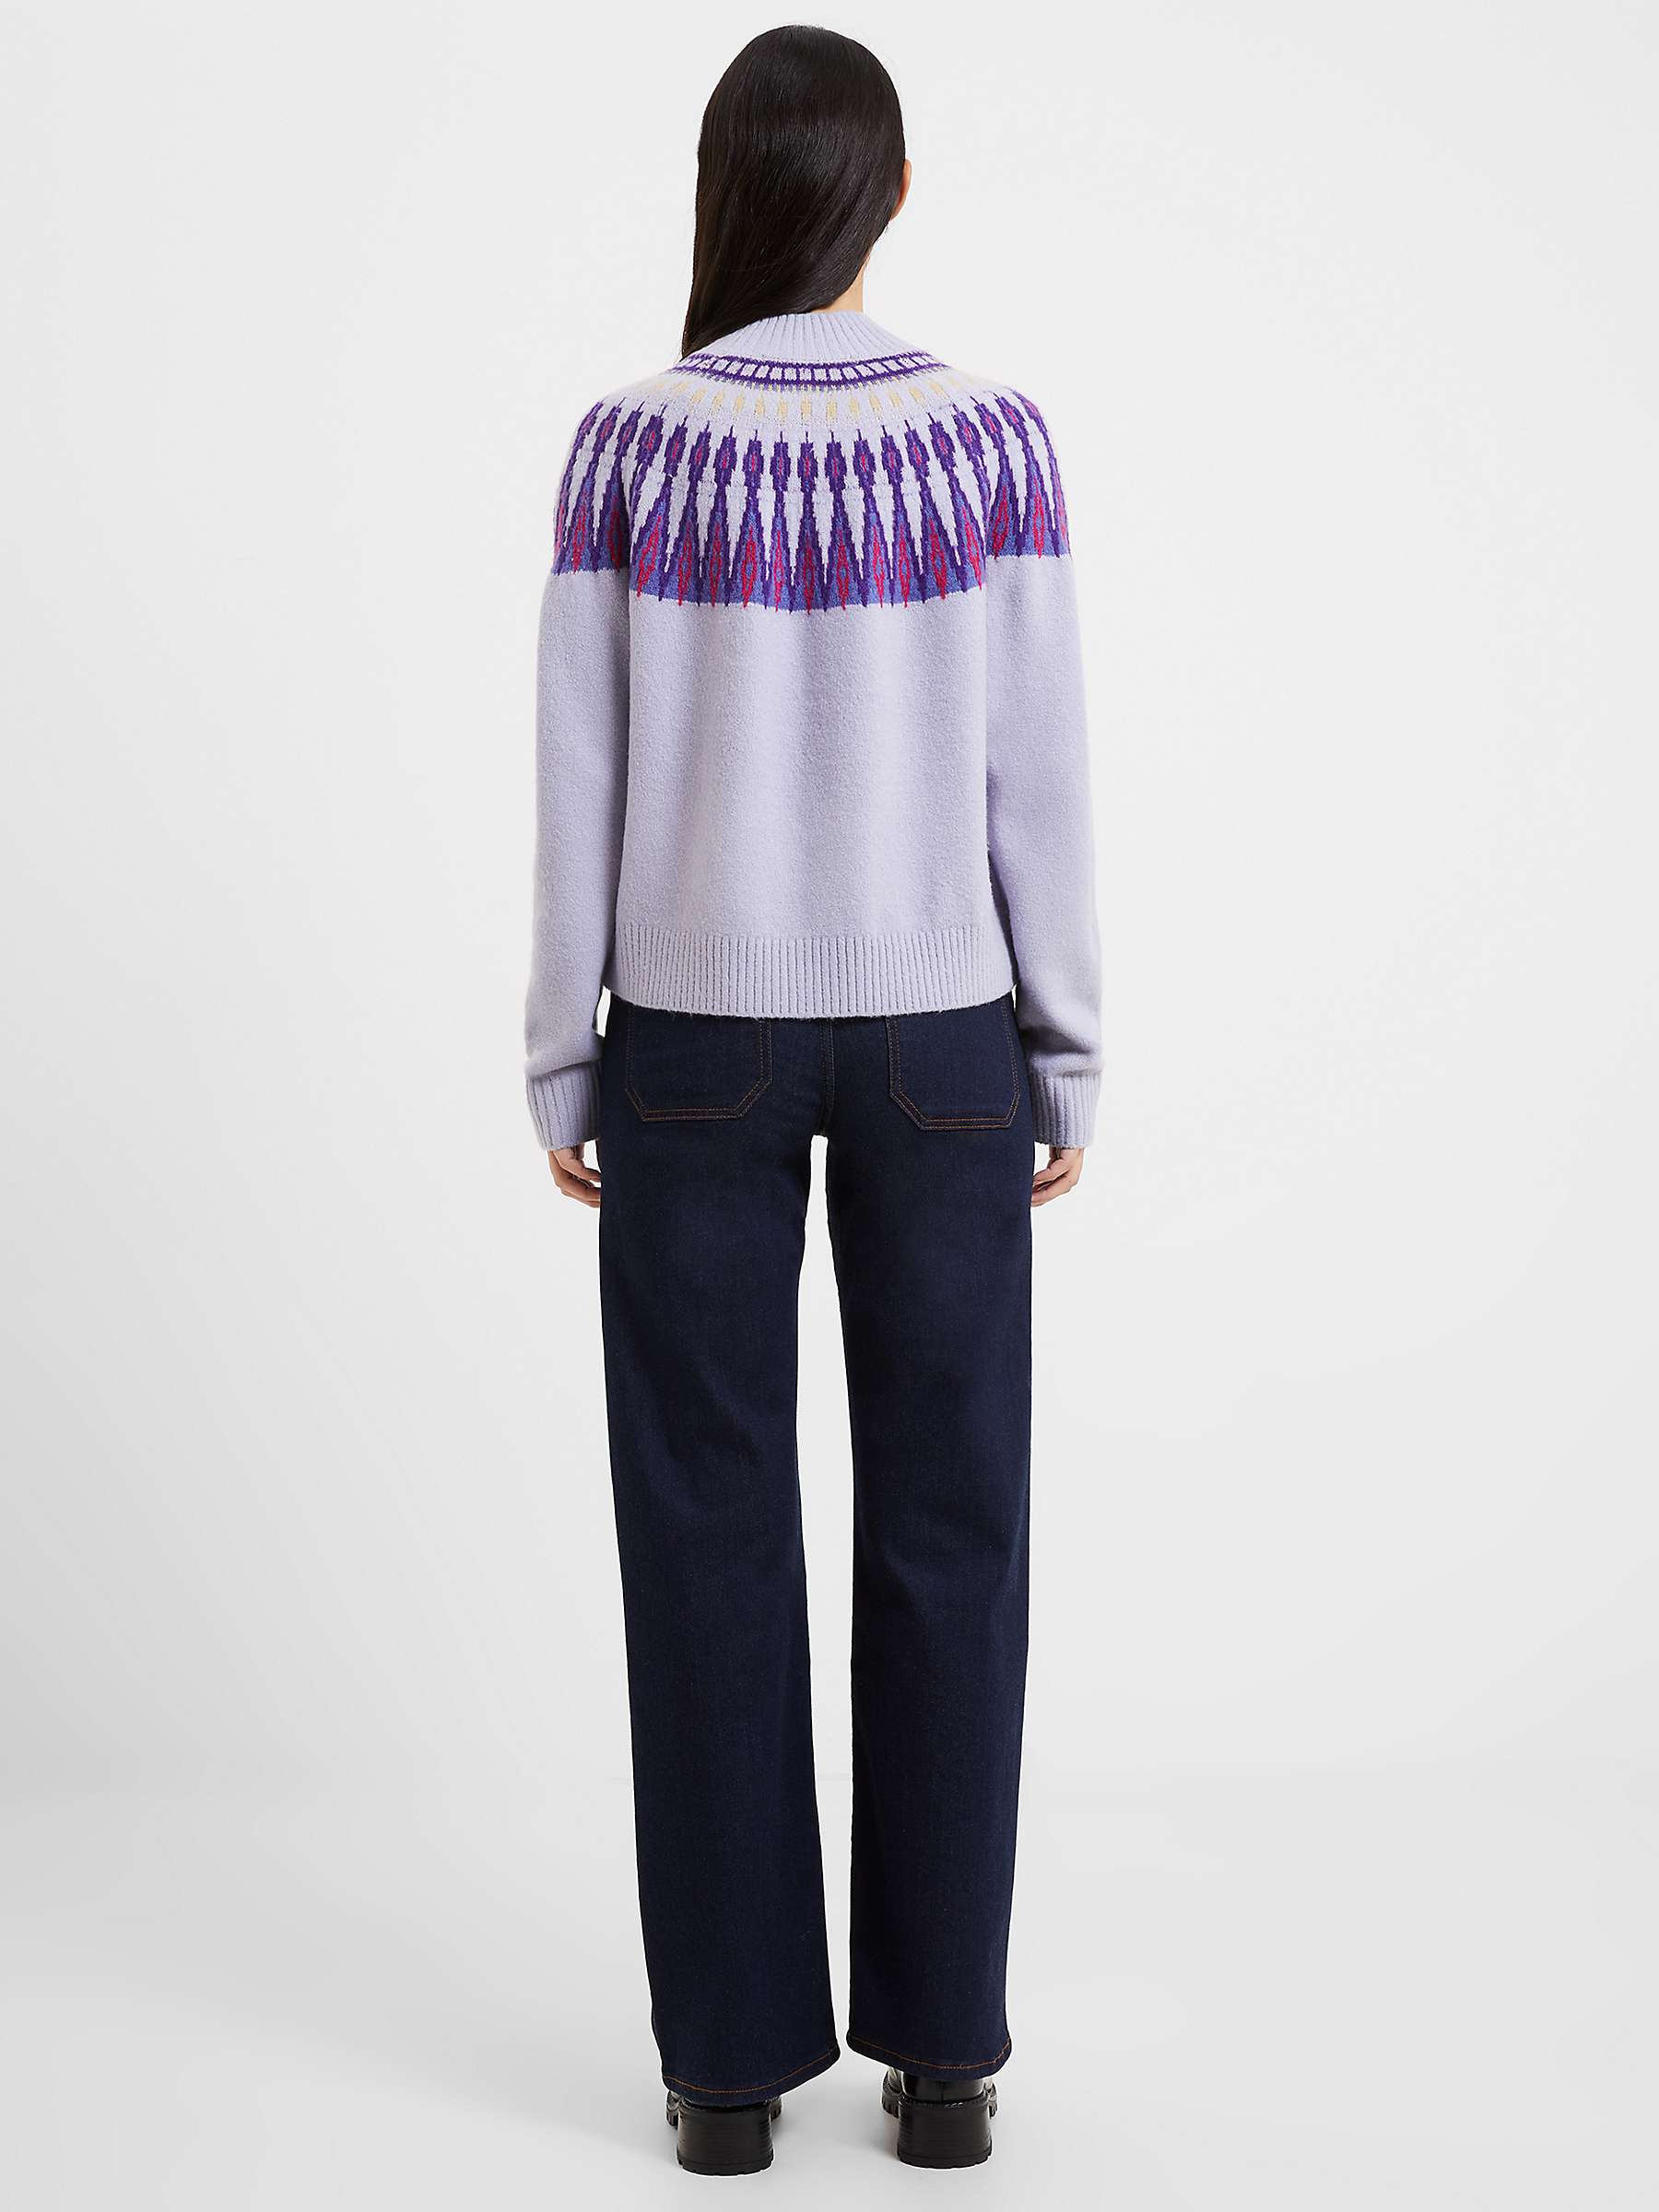 Buy French Connection Jolee Fair Isle Cotton Blend Jumper, Cosmic Sky Online at johnlewis.com